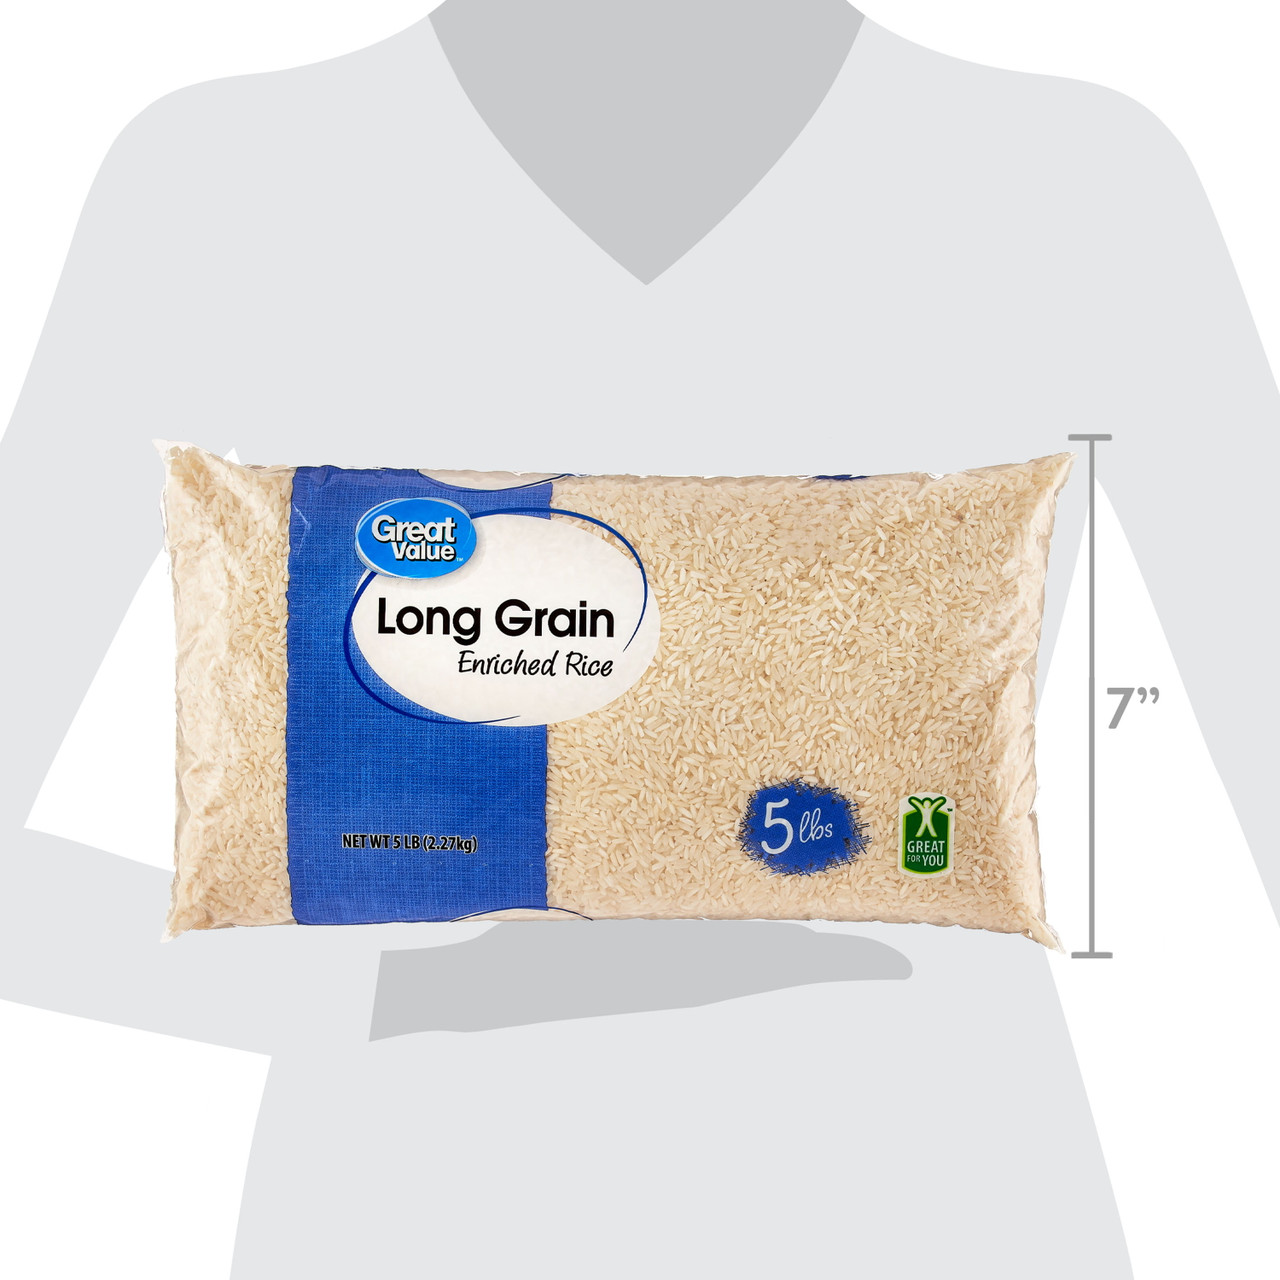 Great Value Long Grain Enriched Rice, 5 lbs - [From 19.00 - Choose pk Qty ] - *Ships from Miami